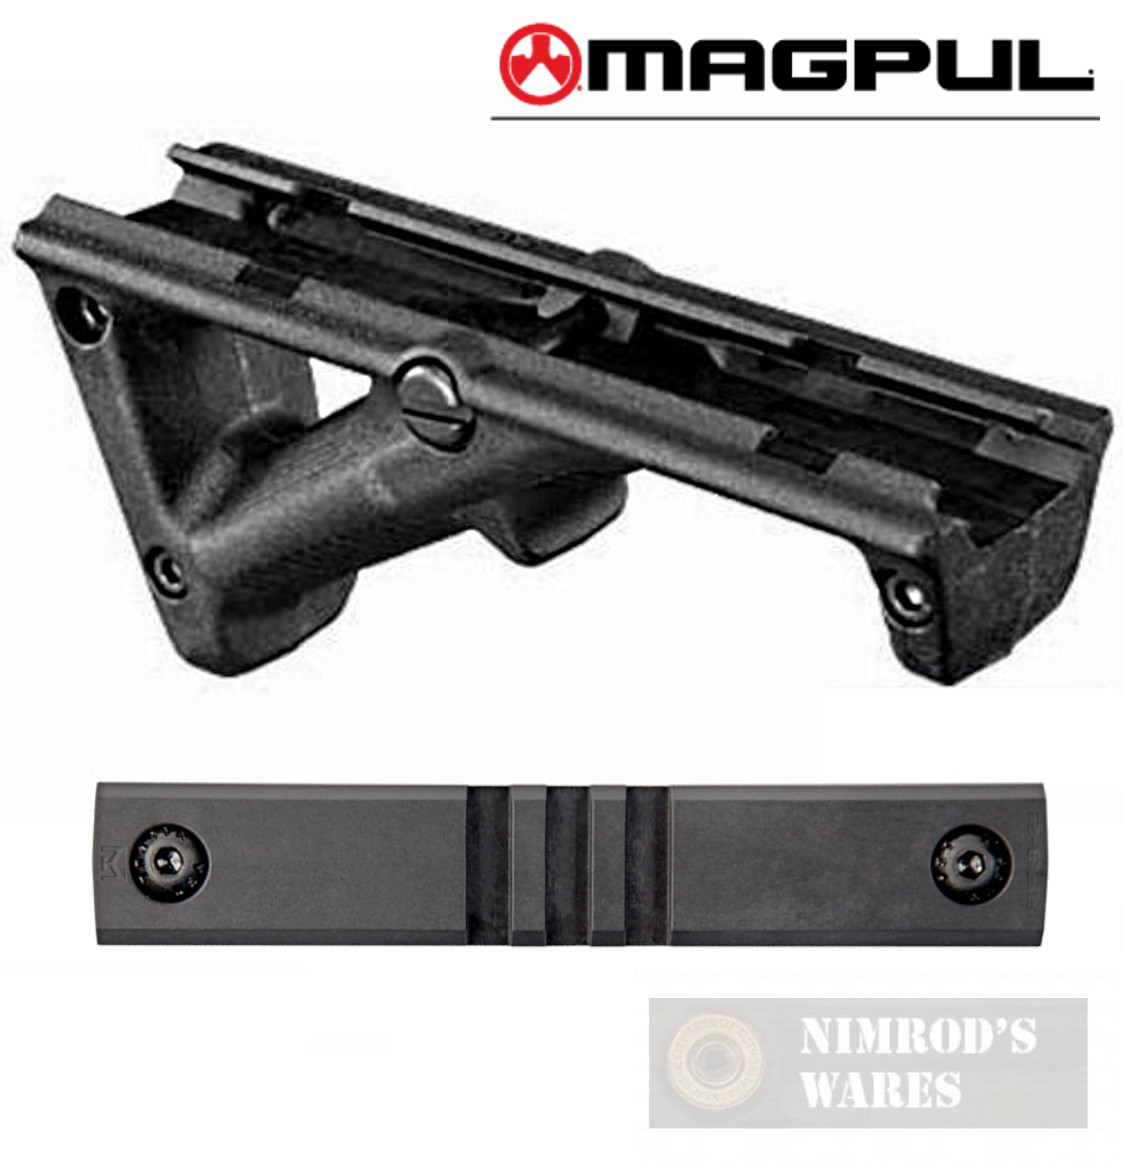 MAGPUL Polymer M-LOK 4.70" Adapter Rail for M-Lok Compatible Systems 3 SLOT 